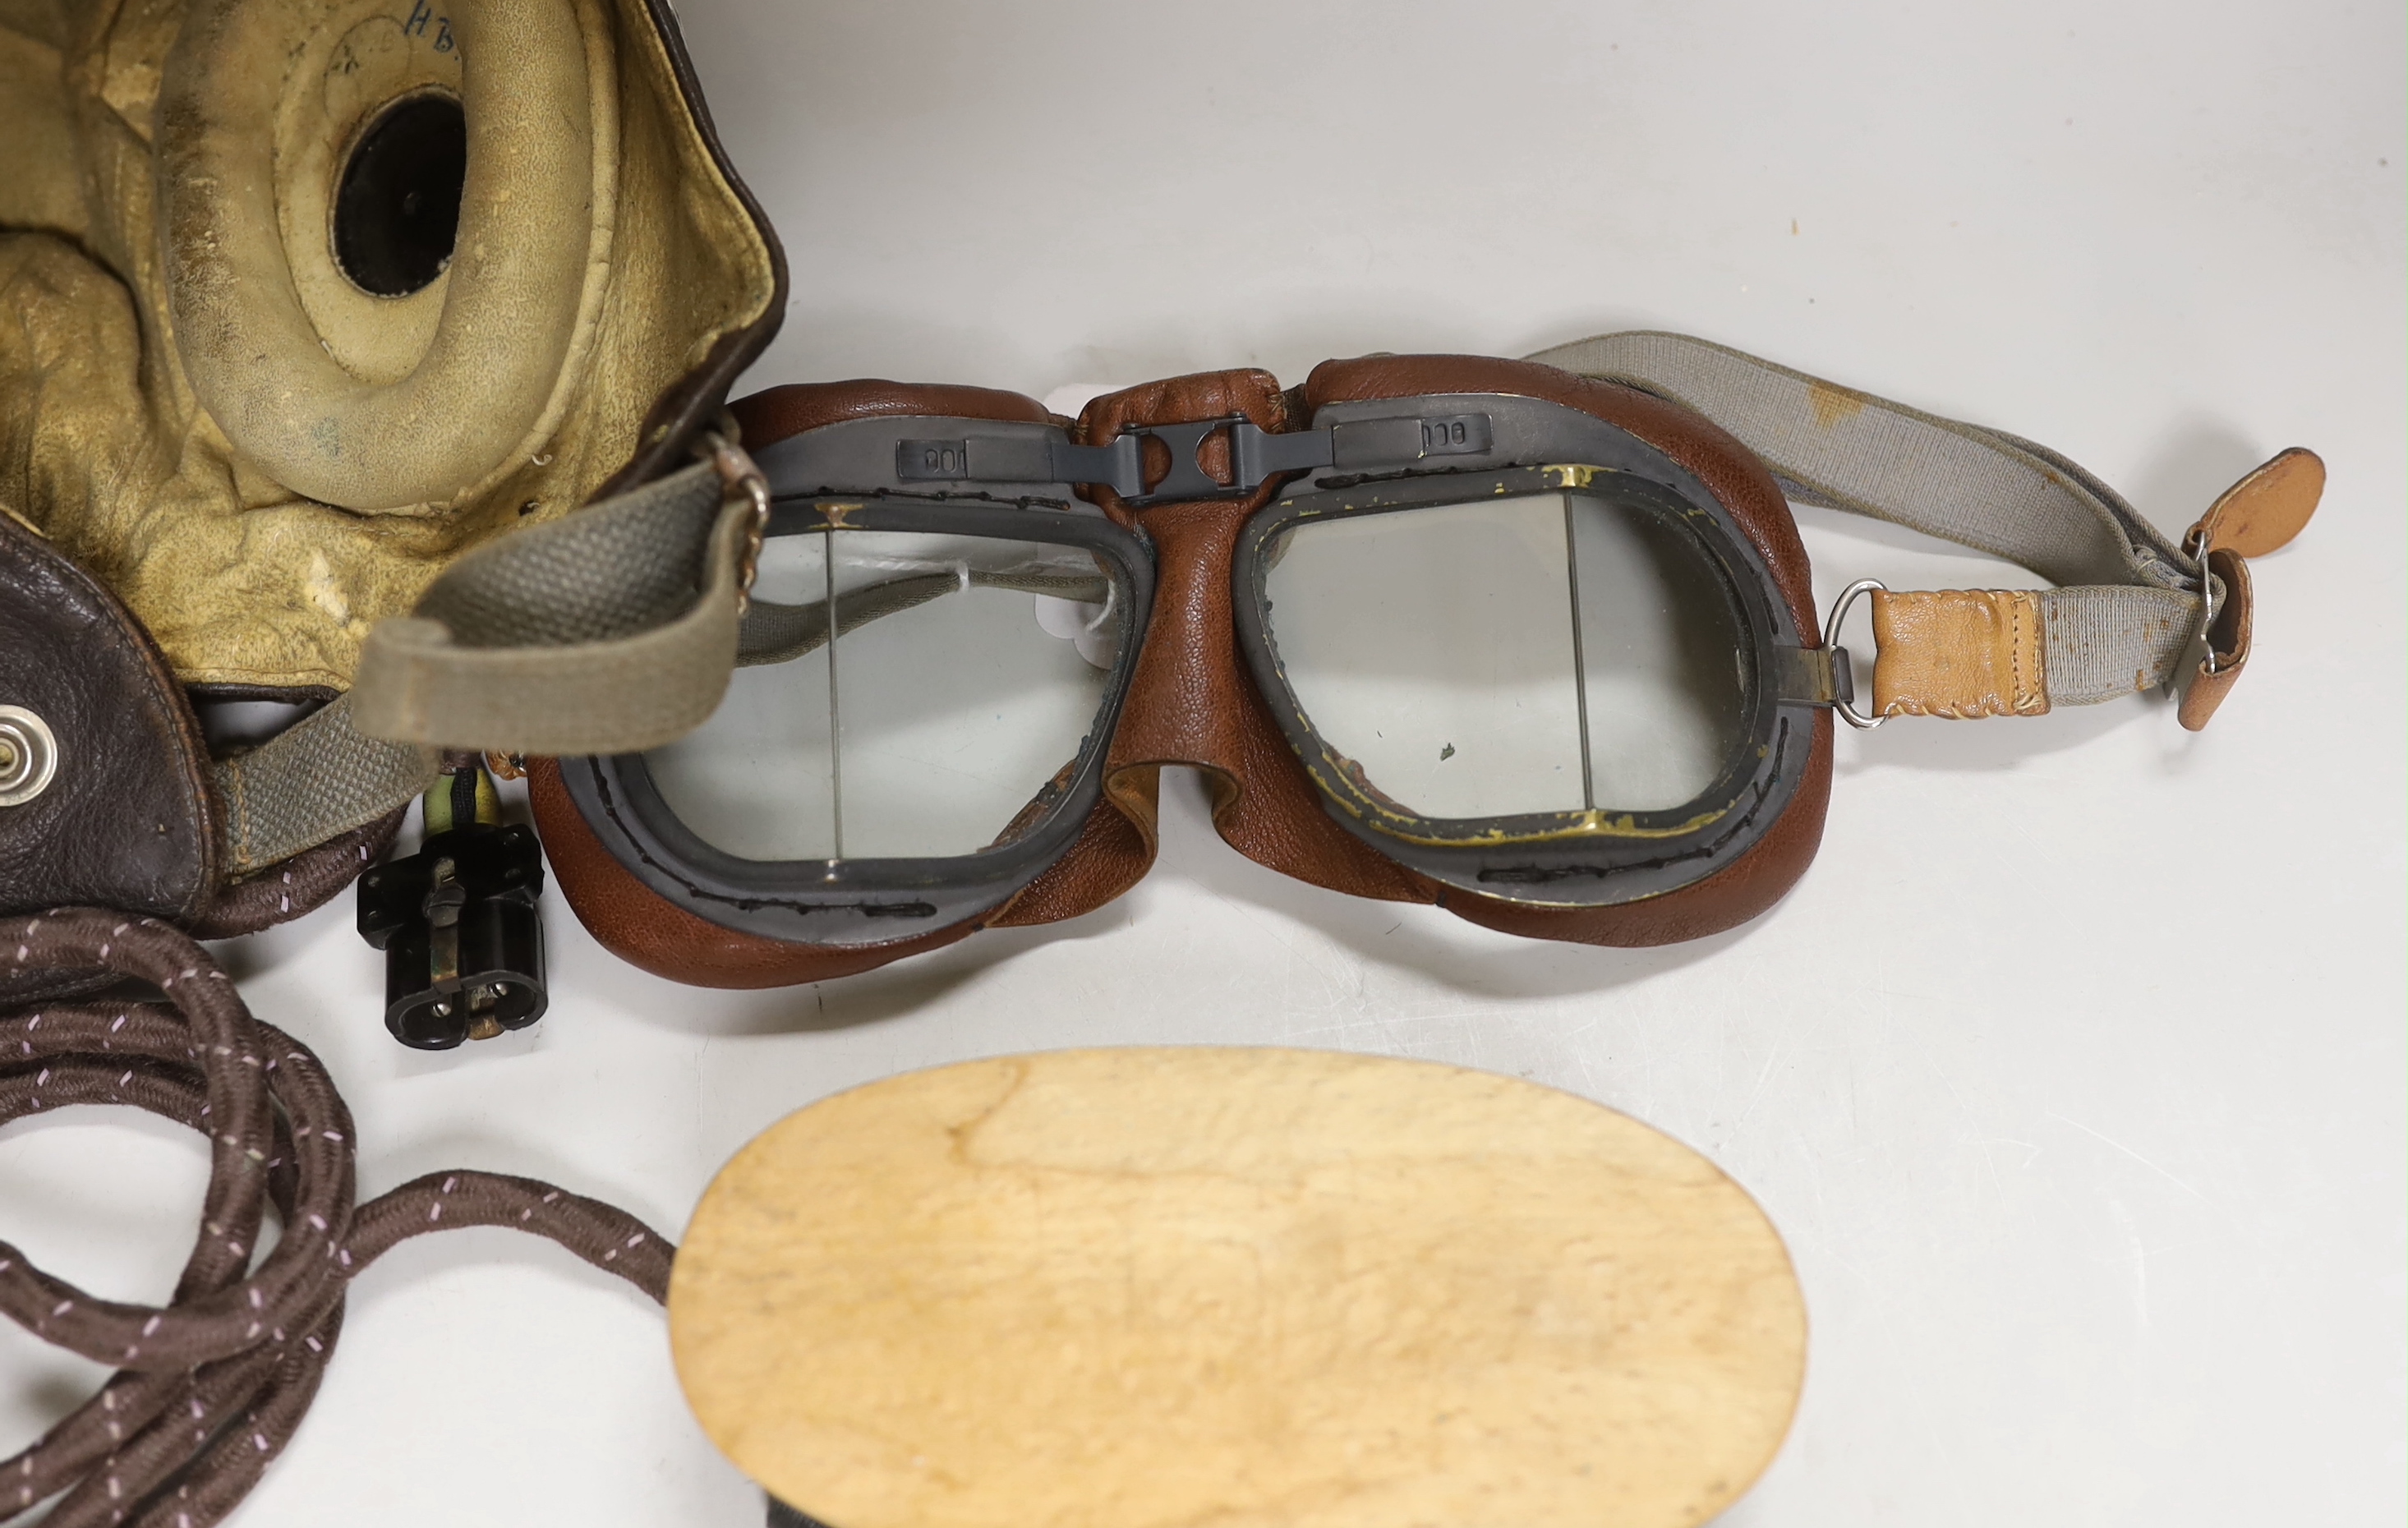 A WWII RAF flying helmet with speaker earpieces and original cables and plugs, Ref No.10A/13466, initialled in pen ‘HB’ for H. Brown 1320701, together with flying goggles and a contemporary clothes brush, provenance - by